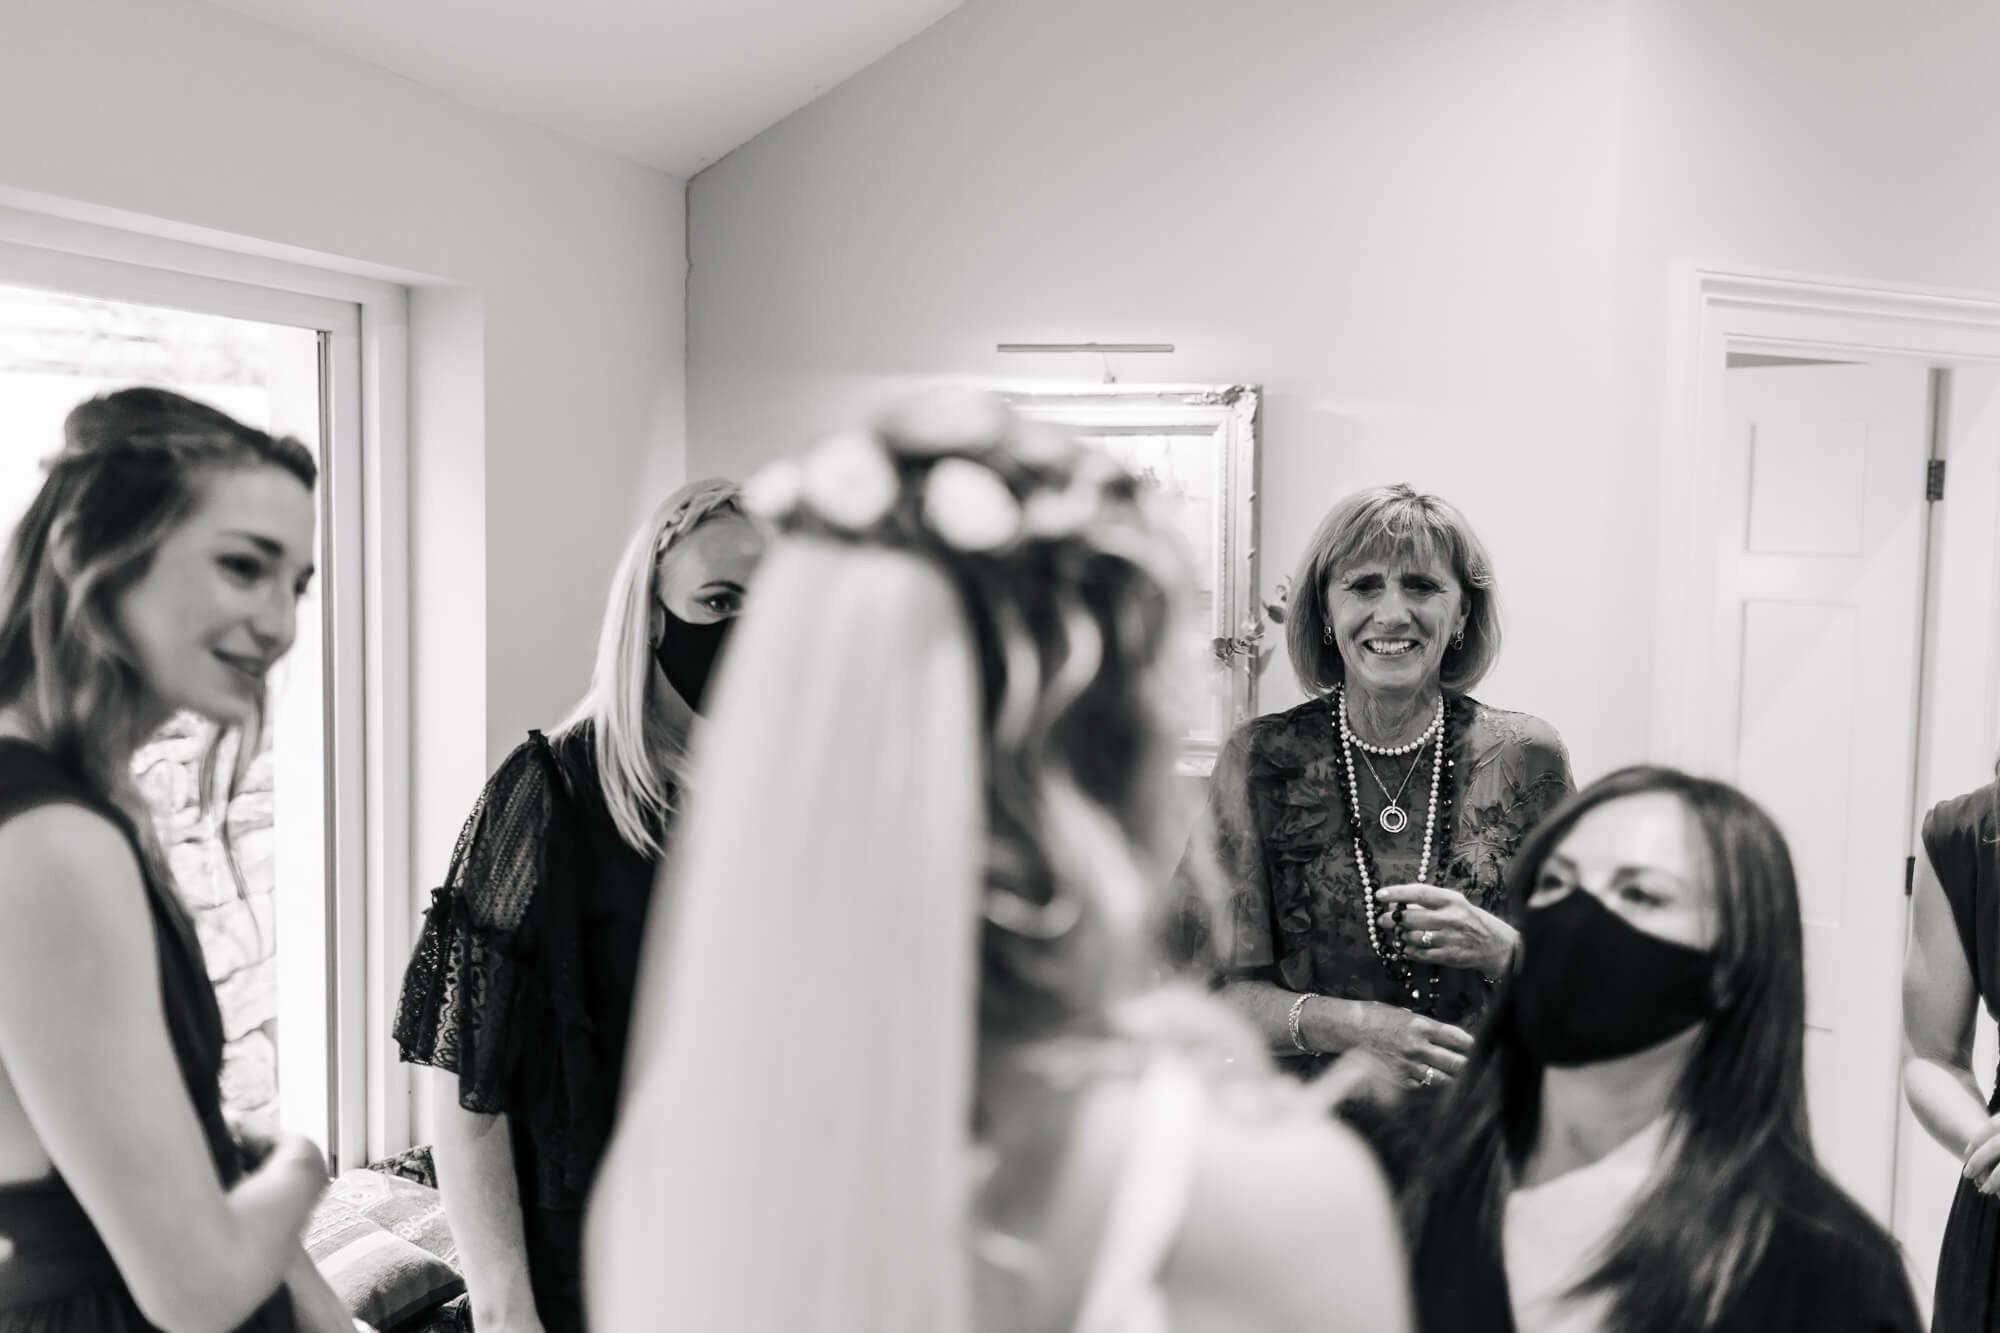 Mum sees the bride for the first time